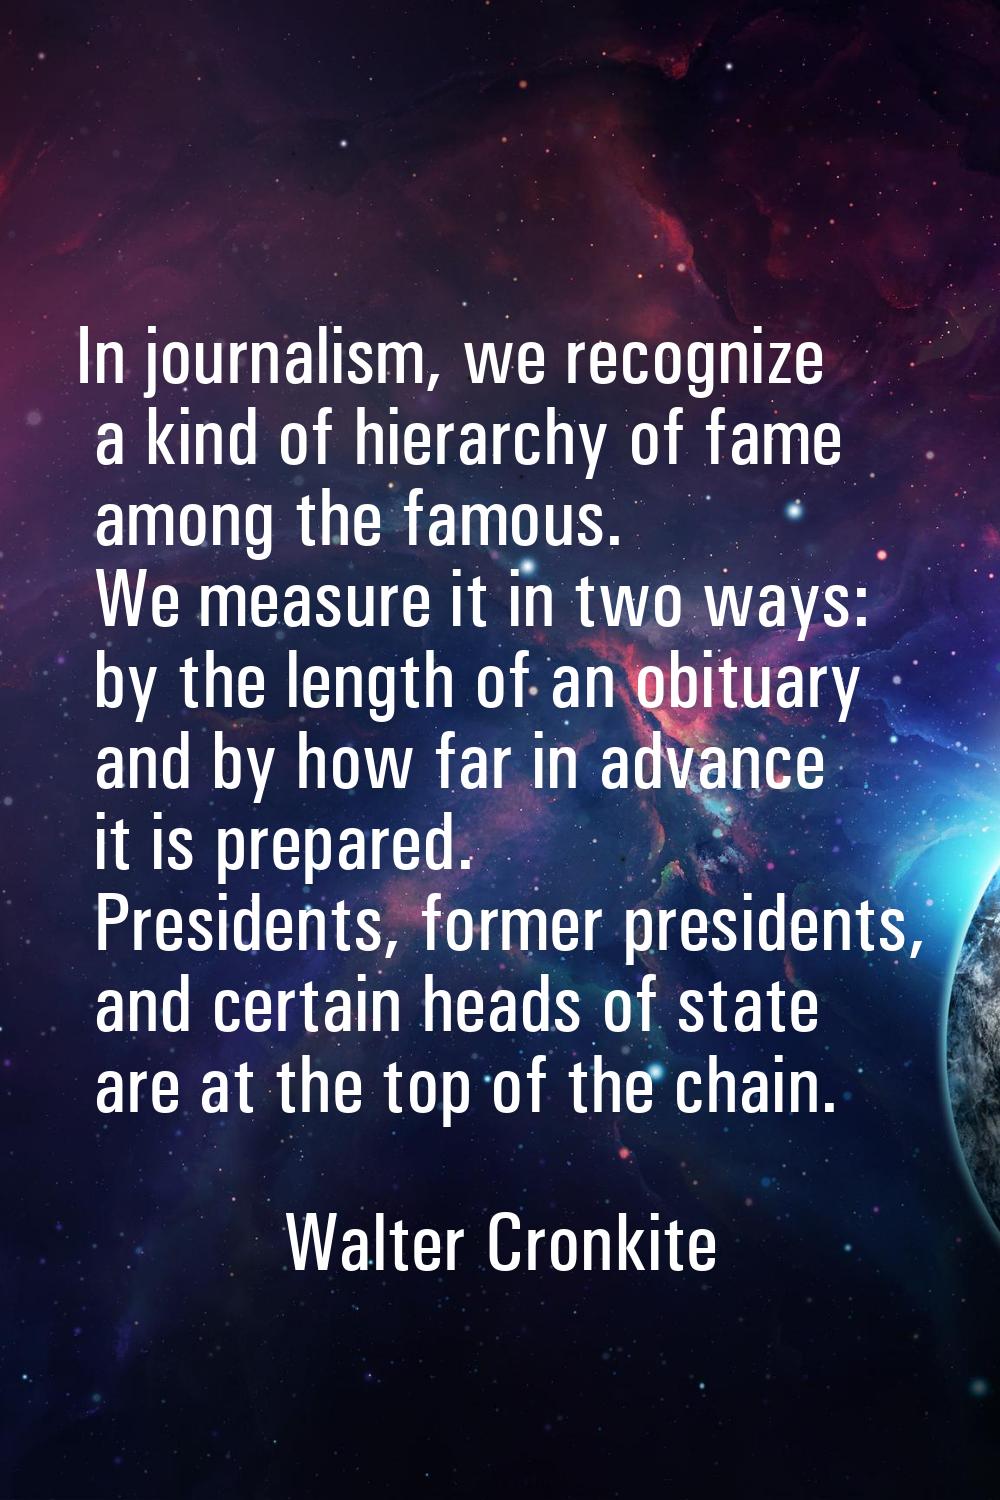 In journalism, we recognize a kind of hierarchy of fame among the famous. We measure it in two ways